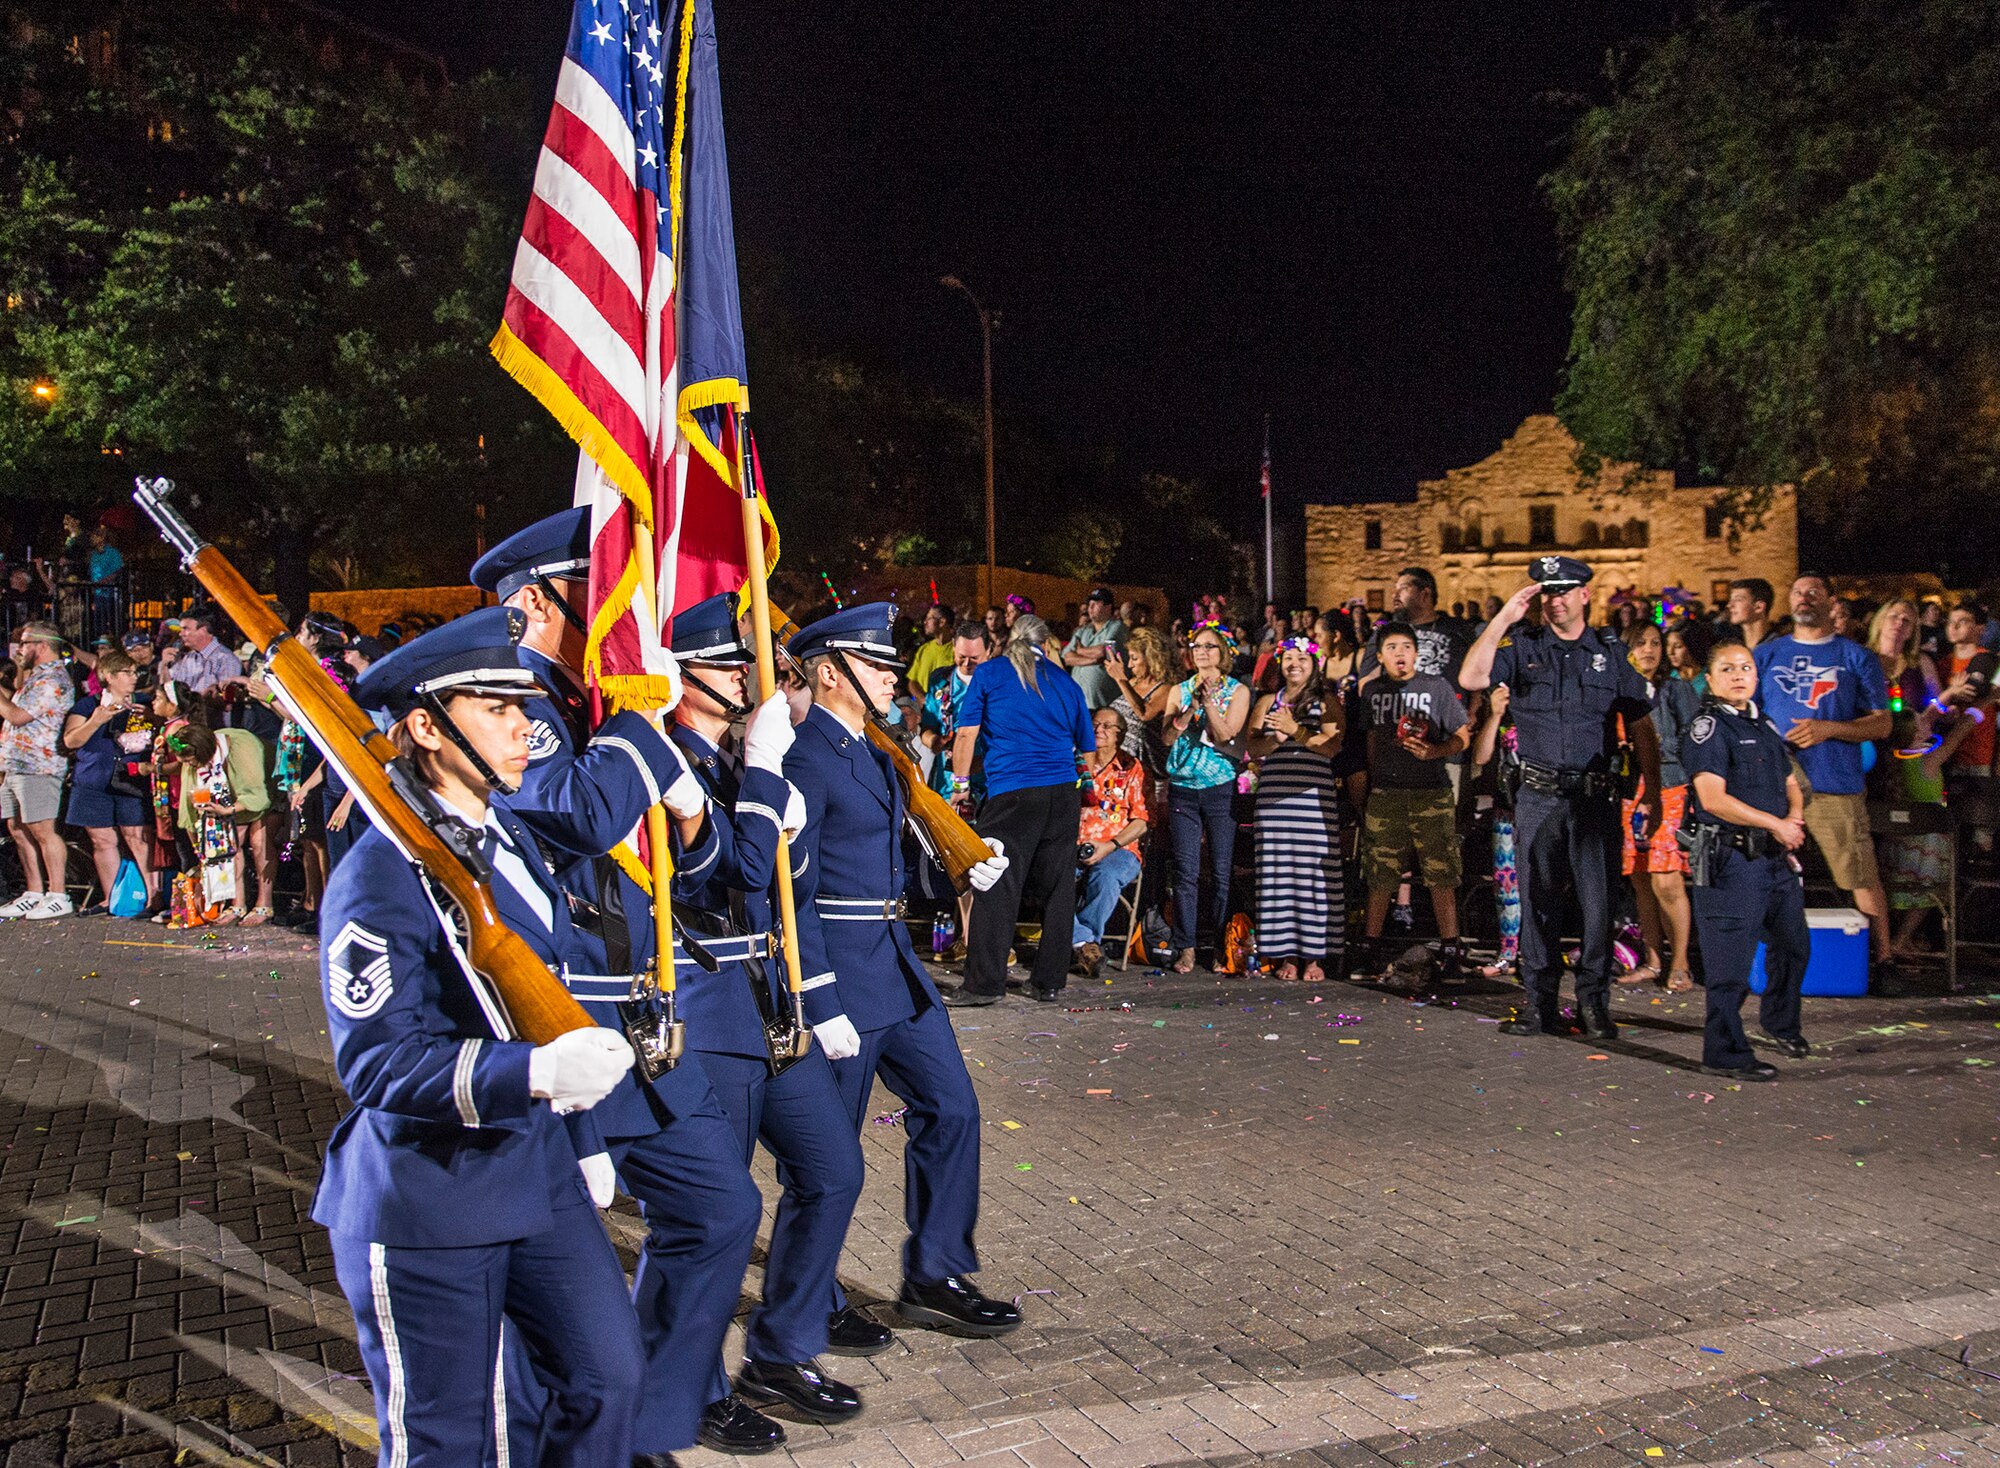 The 433rd Airlift Wing Honor Guard marches past the Alamo during the Fiesta Flambeau parade April 23, 2016. The Fiesta Flambeau parade is one of the largest illuminated parades in the world, with over 750,000 spectators and 1.5 million television viewers.  (U.S. Air Force photo by Benjamin Faske) (released)